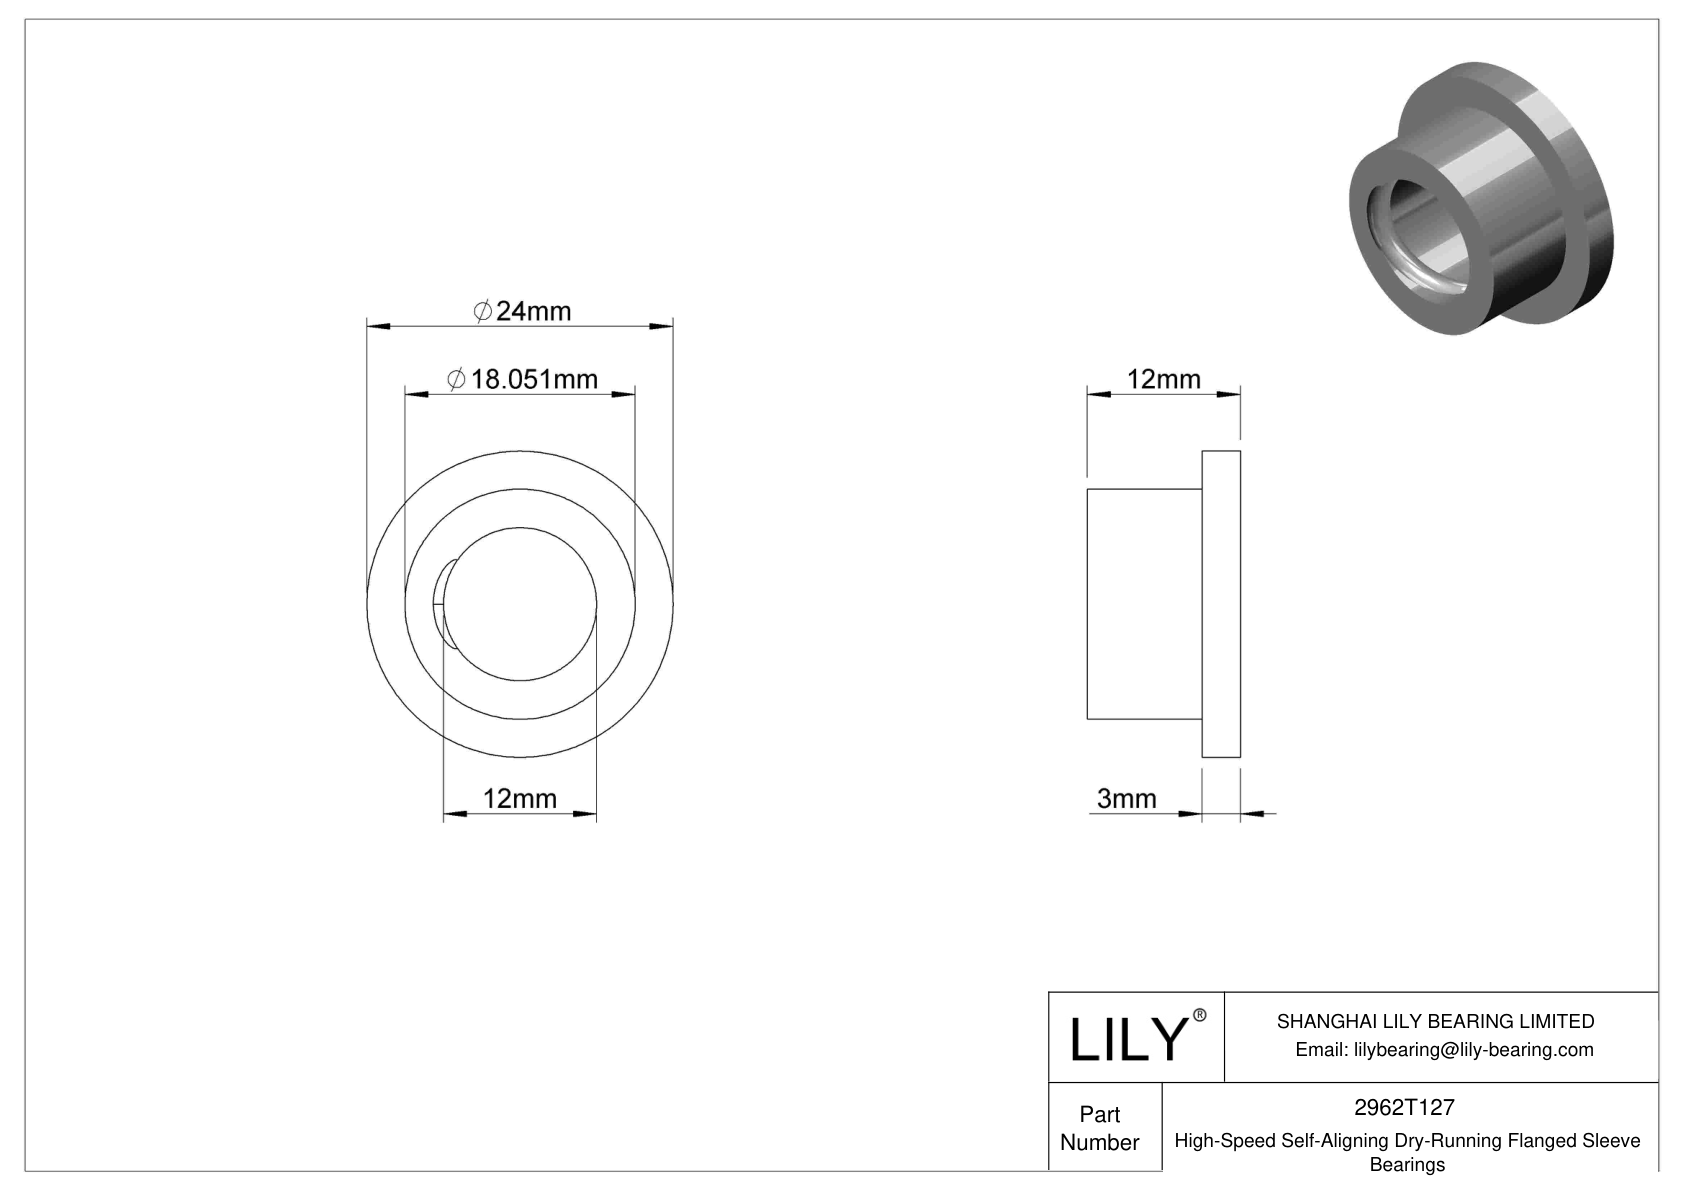 CJGCTBCH High-Temperature Dry-Running Flanged Sleeve Bearings cad drawing